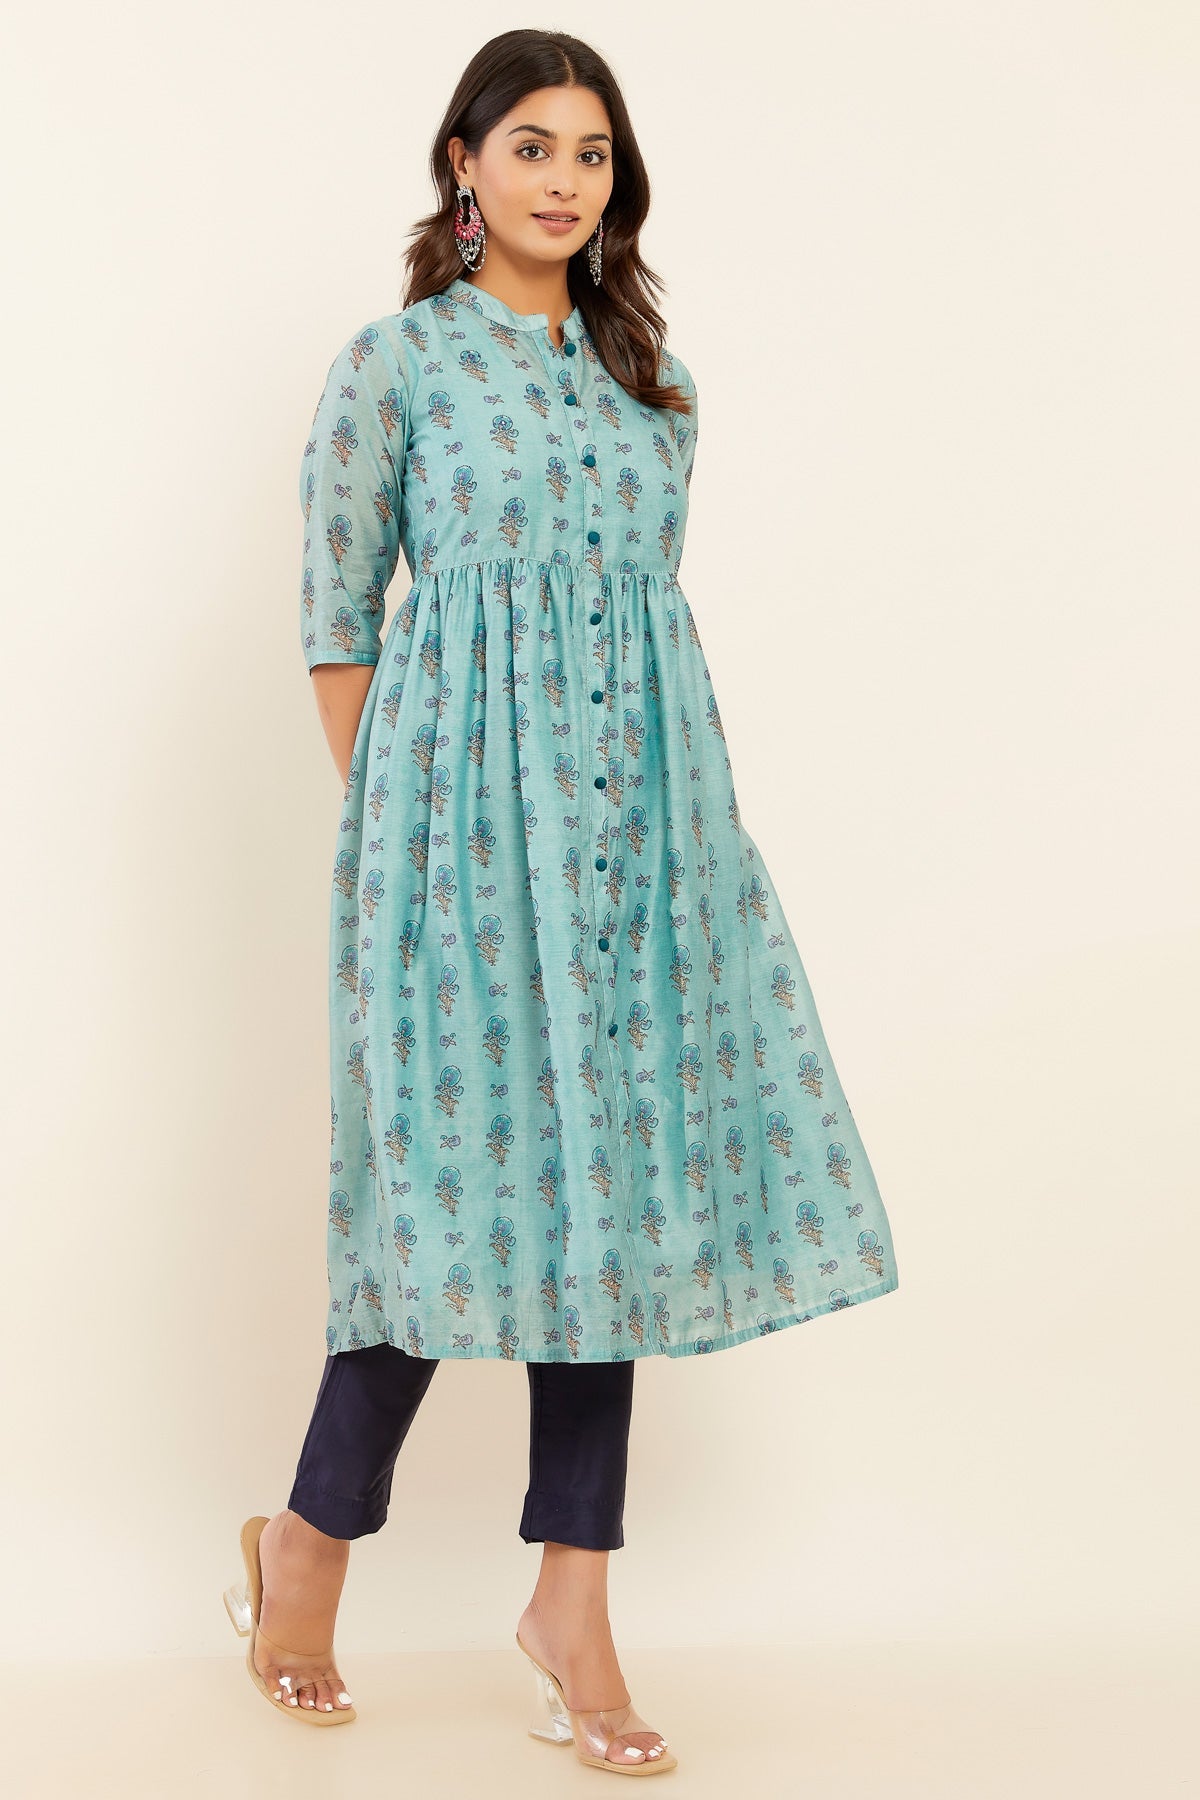 Contrast All Over Floral Printed Kurta - Blue